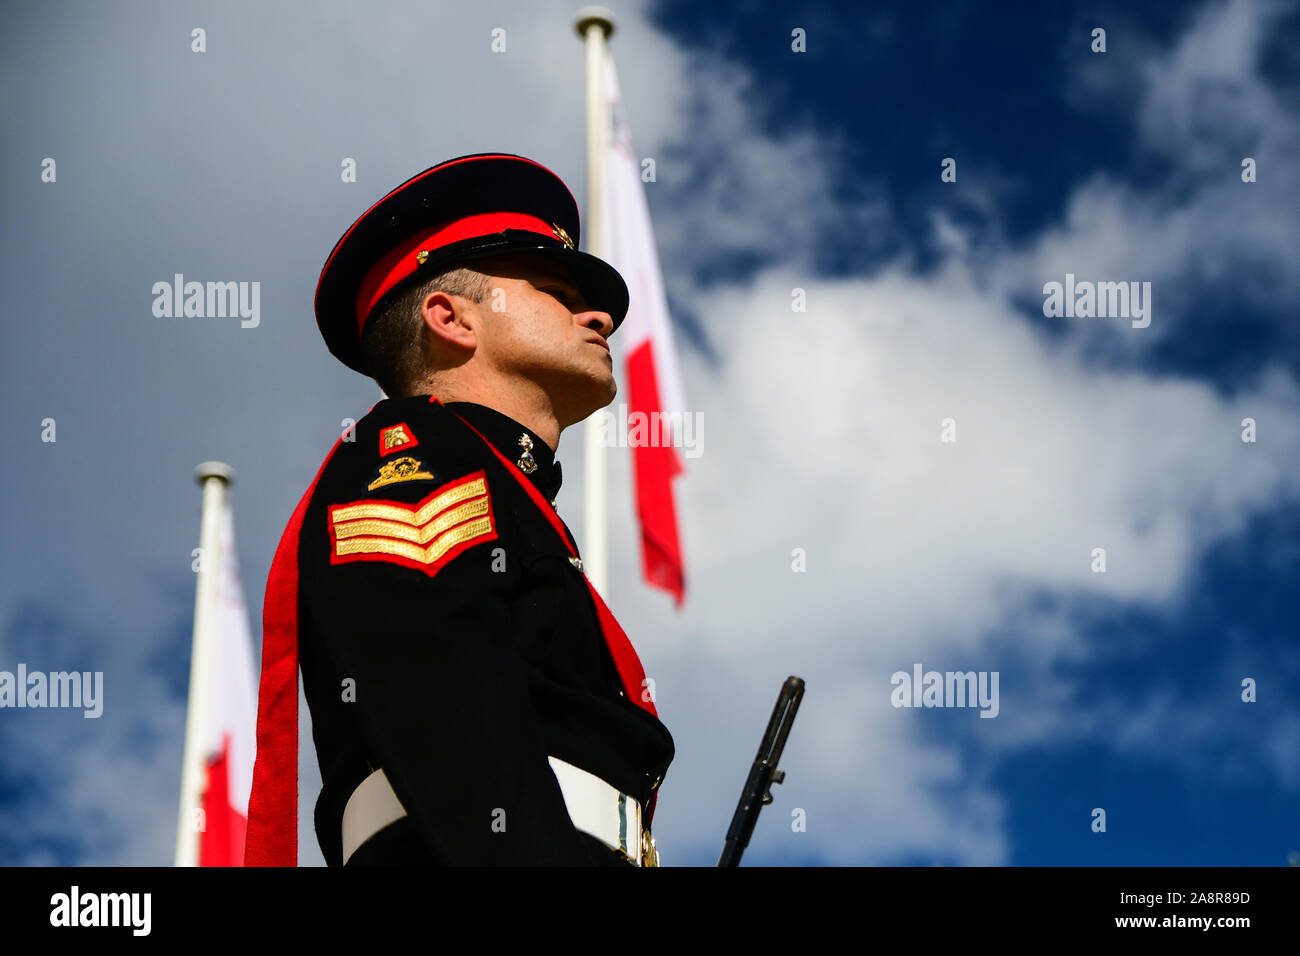 (191110) -- FLORIANA (MALTA), Nov. 10, 2019 (Xinhua) -- A soldier is seen during the Remembrance Day ceremony at the War Memorial in Floriana, Malta, on Nov. 10, 2019. Malta marked Remembrance Day to salute the war dead on Sunday. (Photo by Jonathan Borg/Xinhua) Stock Photo